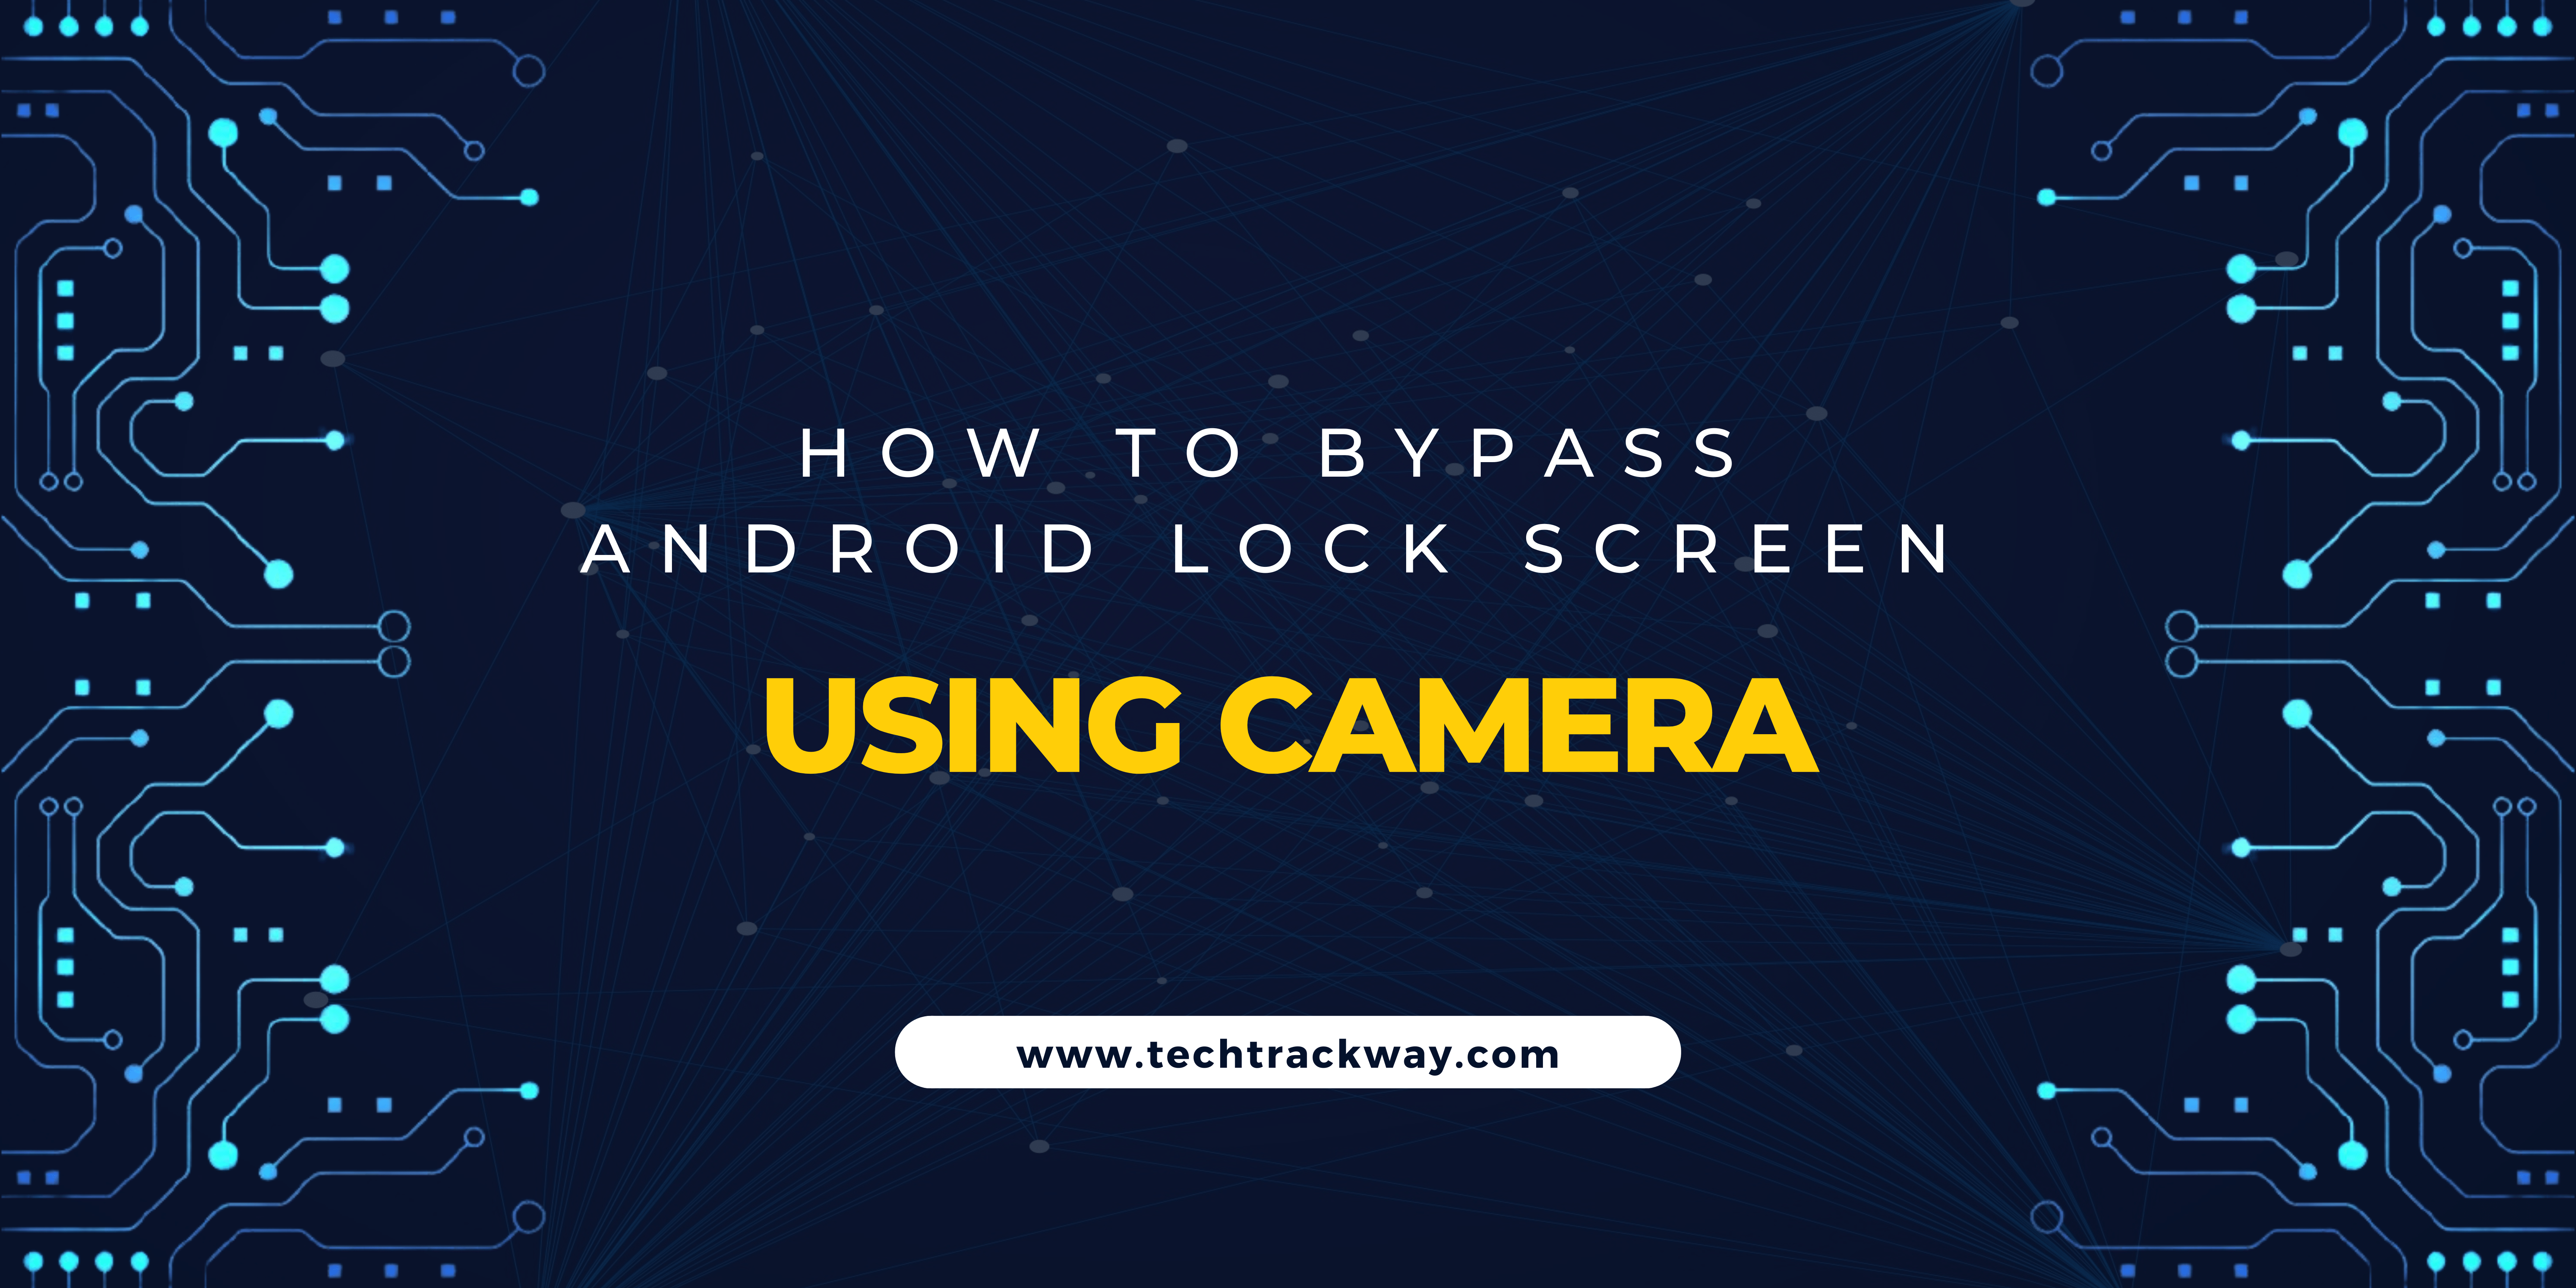 How To Bypass Android Lock Screen Using Camera